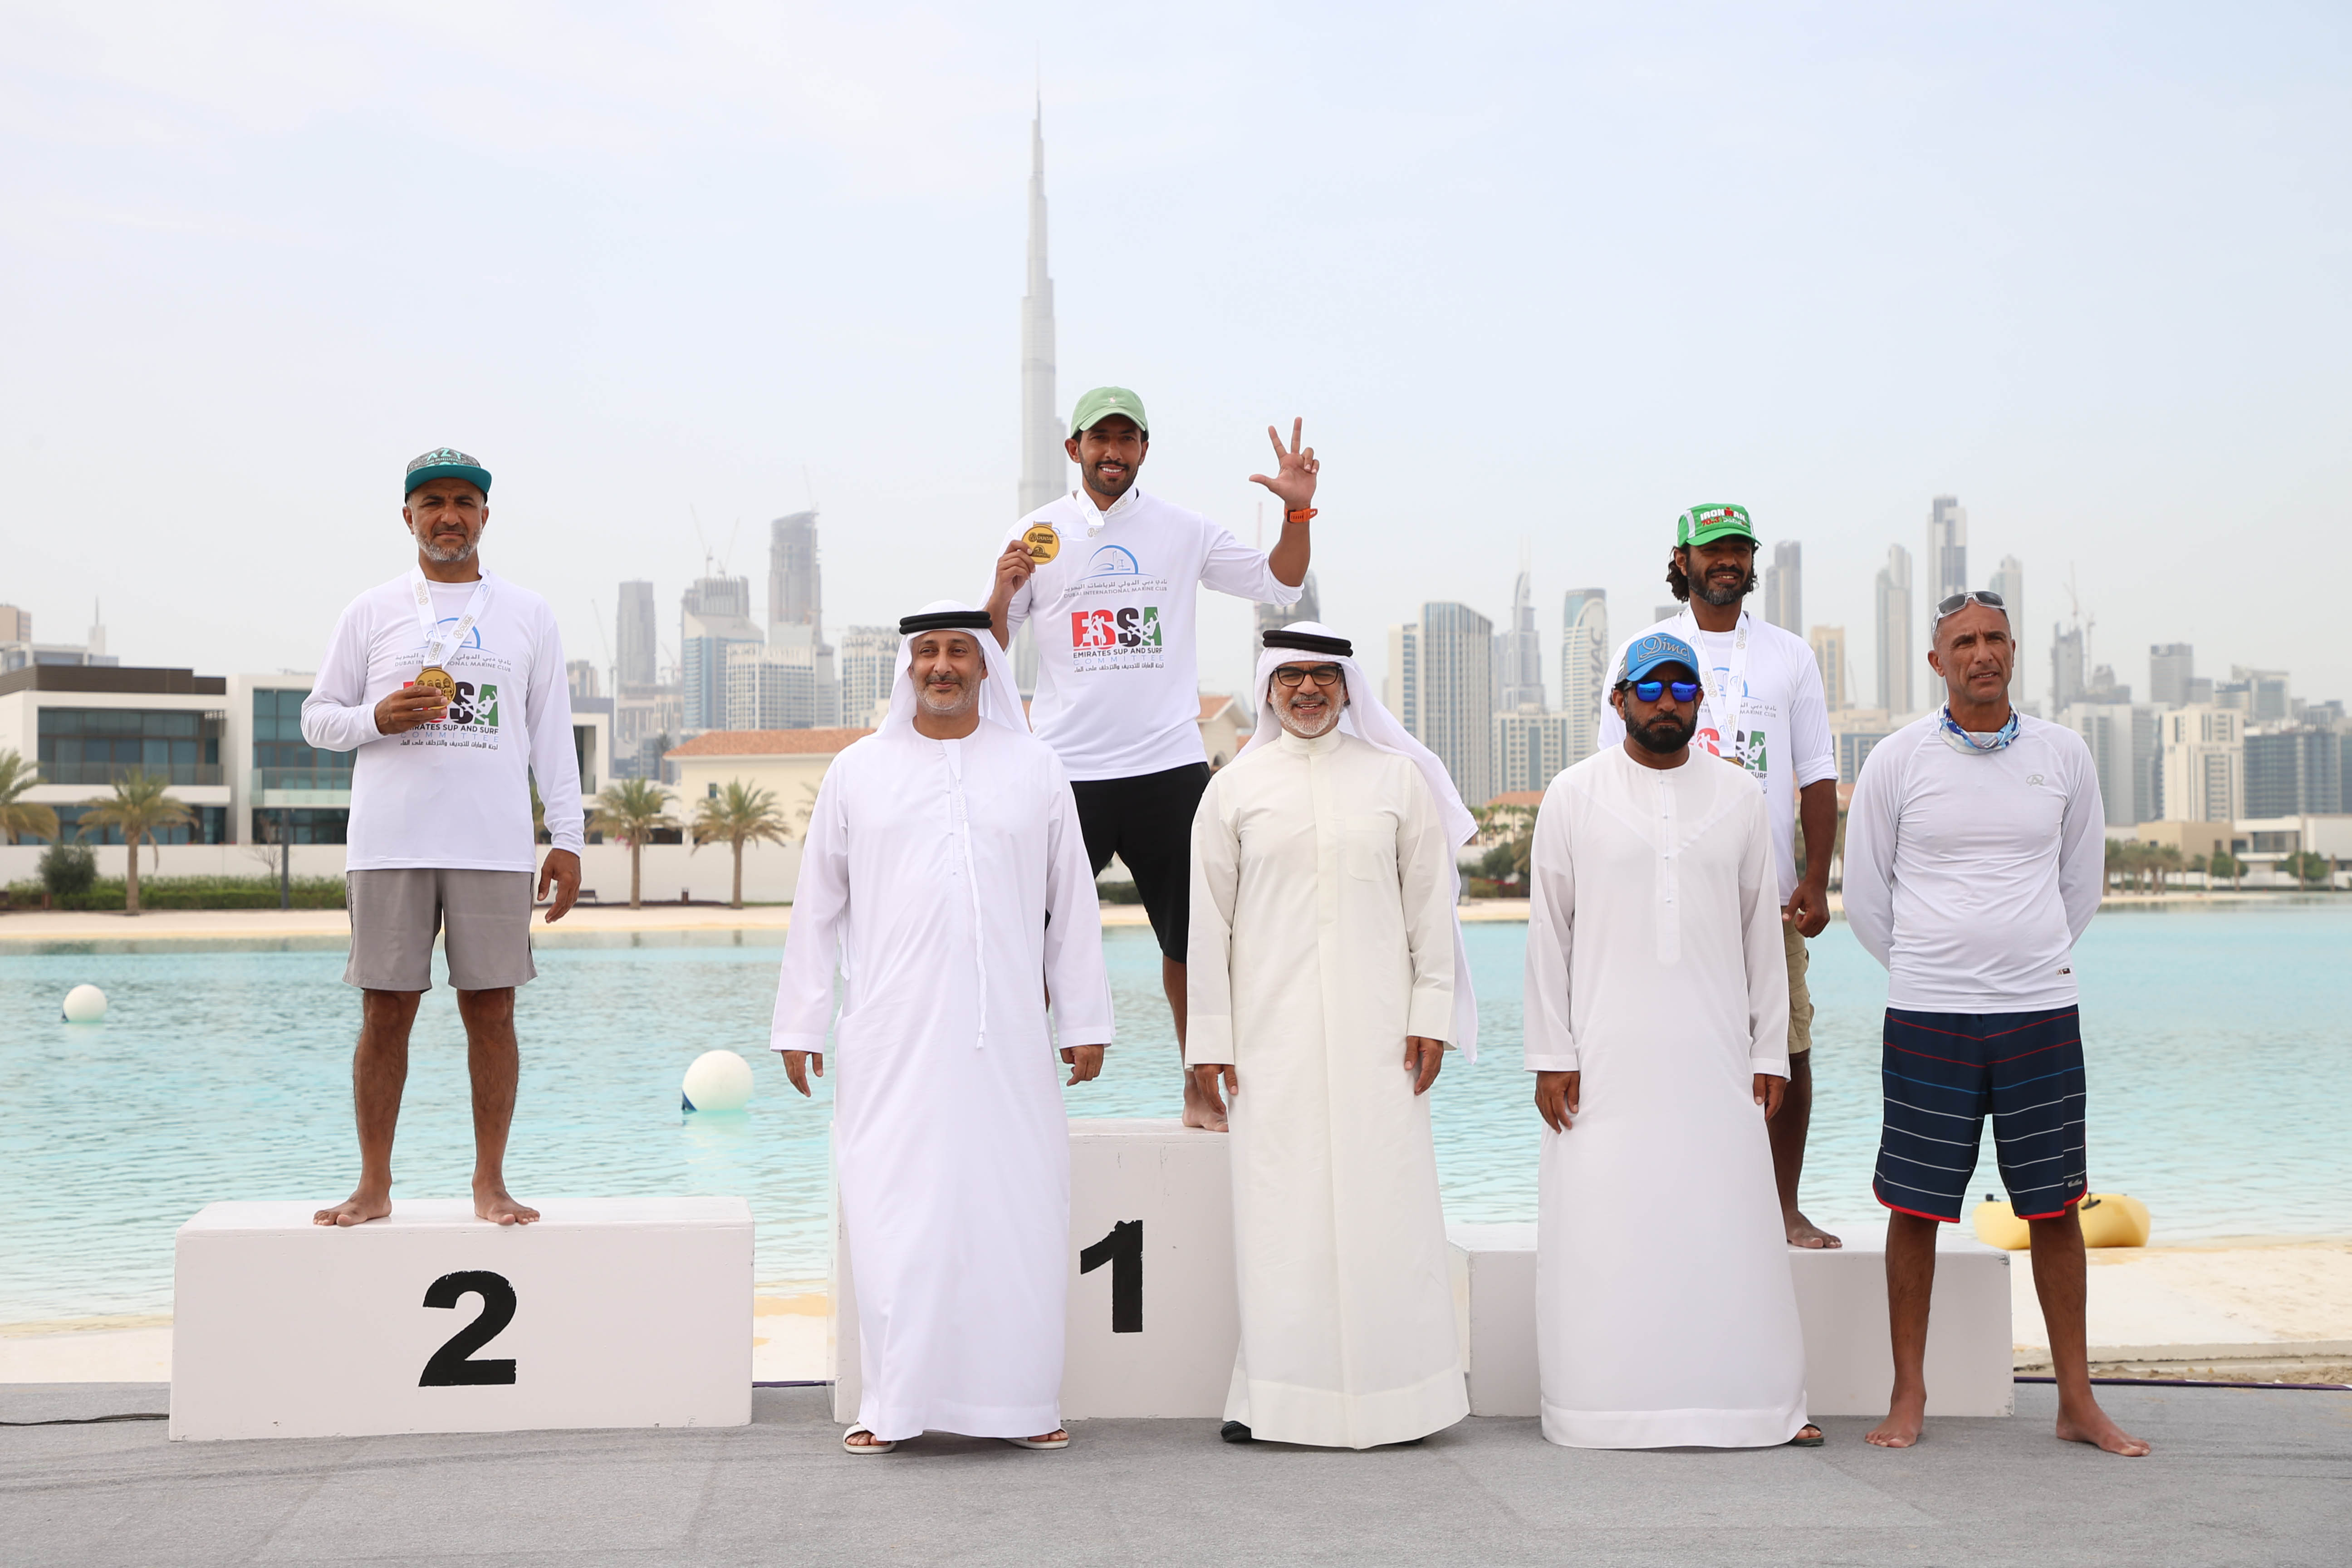 Huge Success for "We Paddle for Dubai"